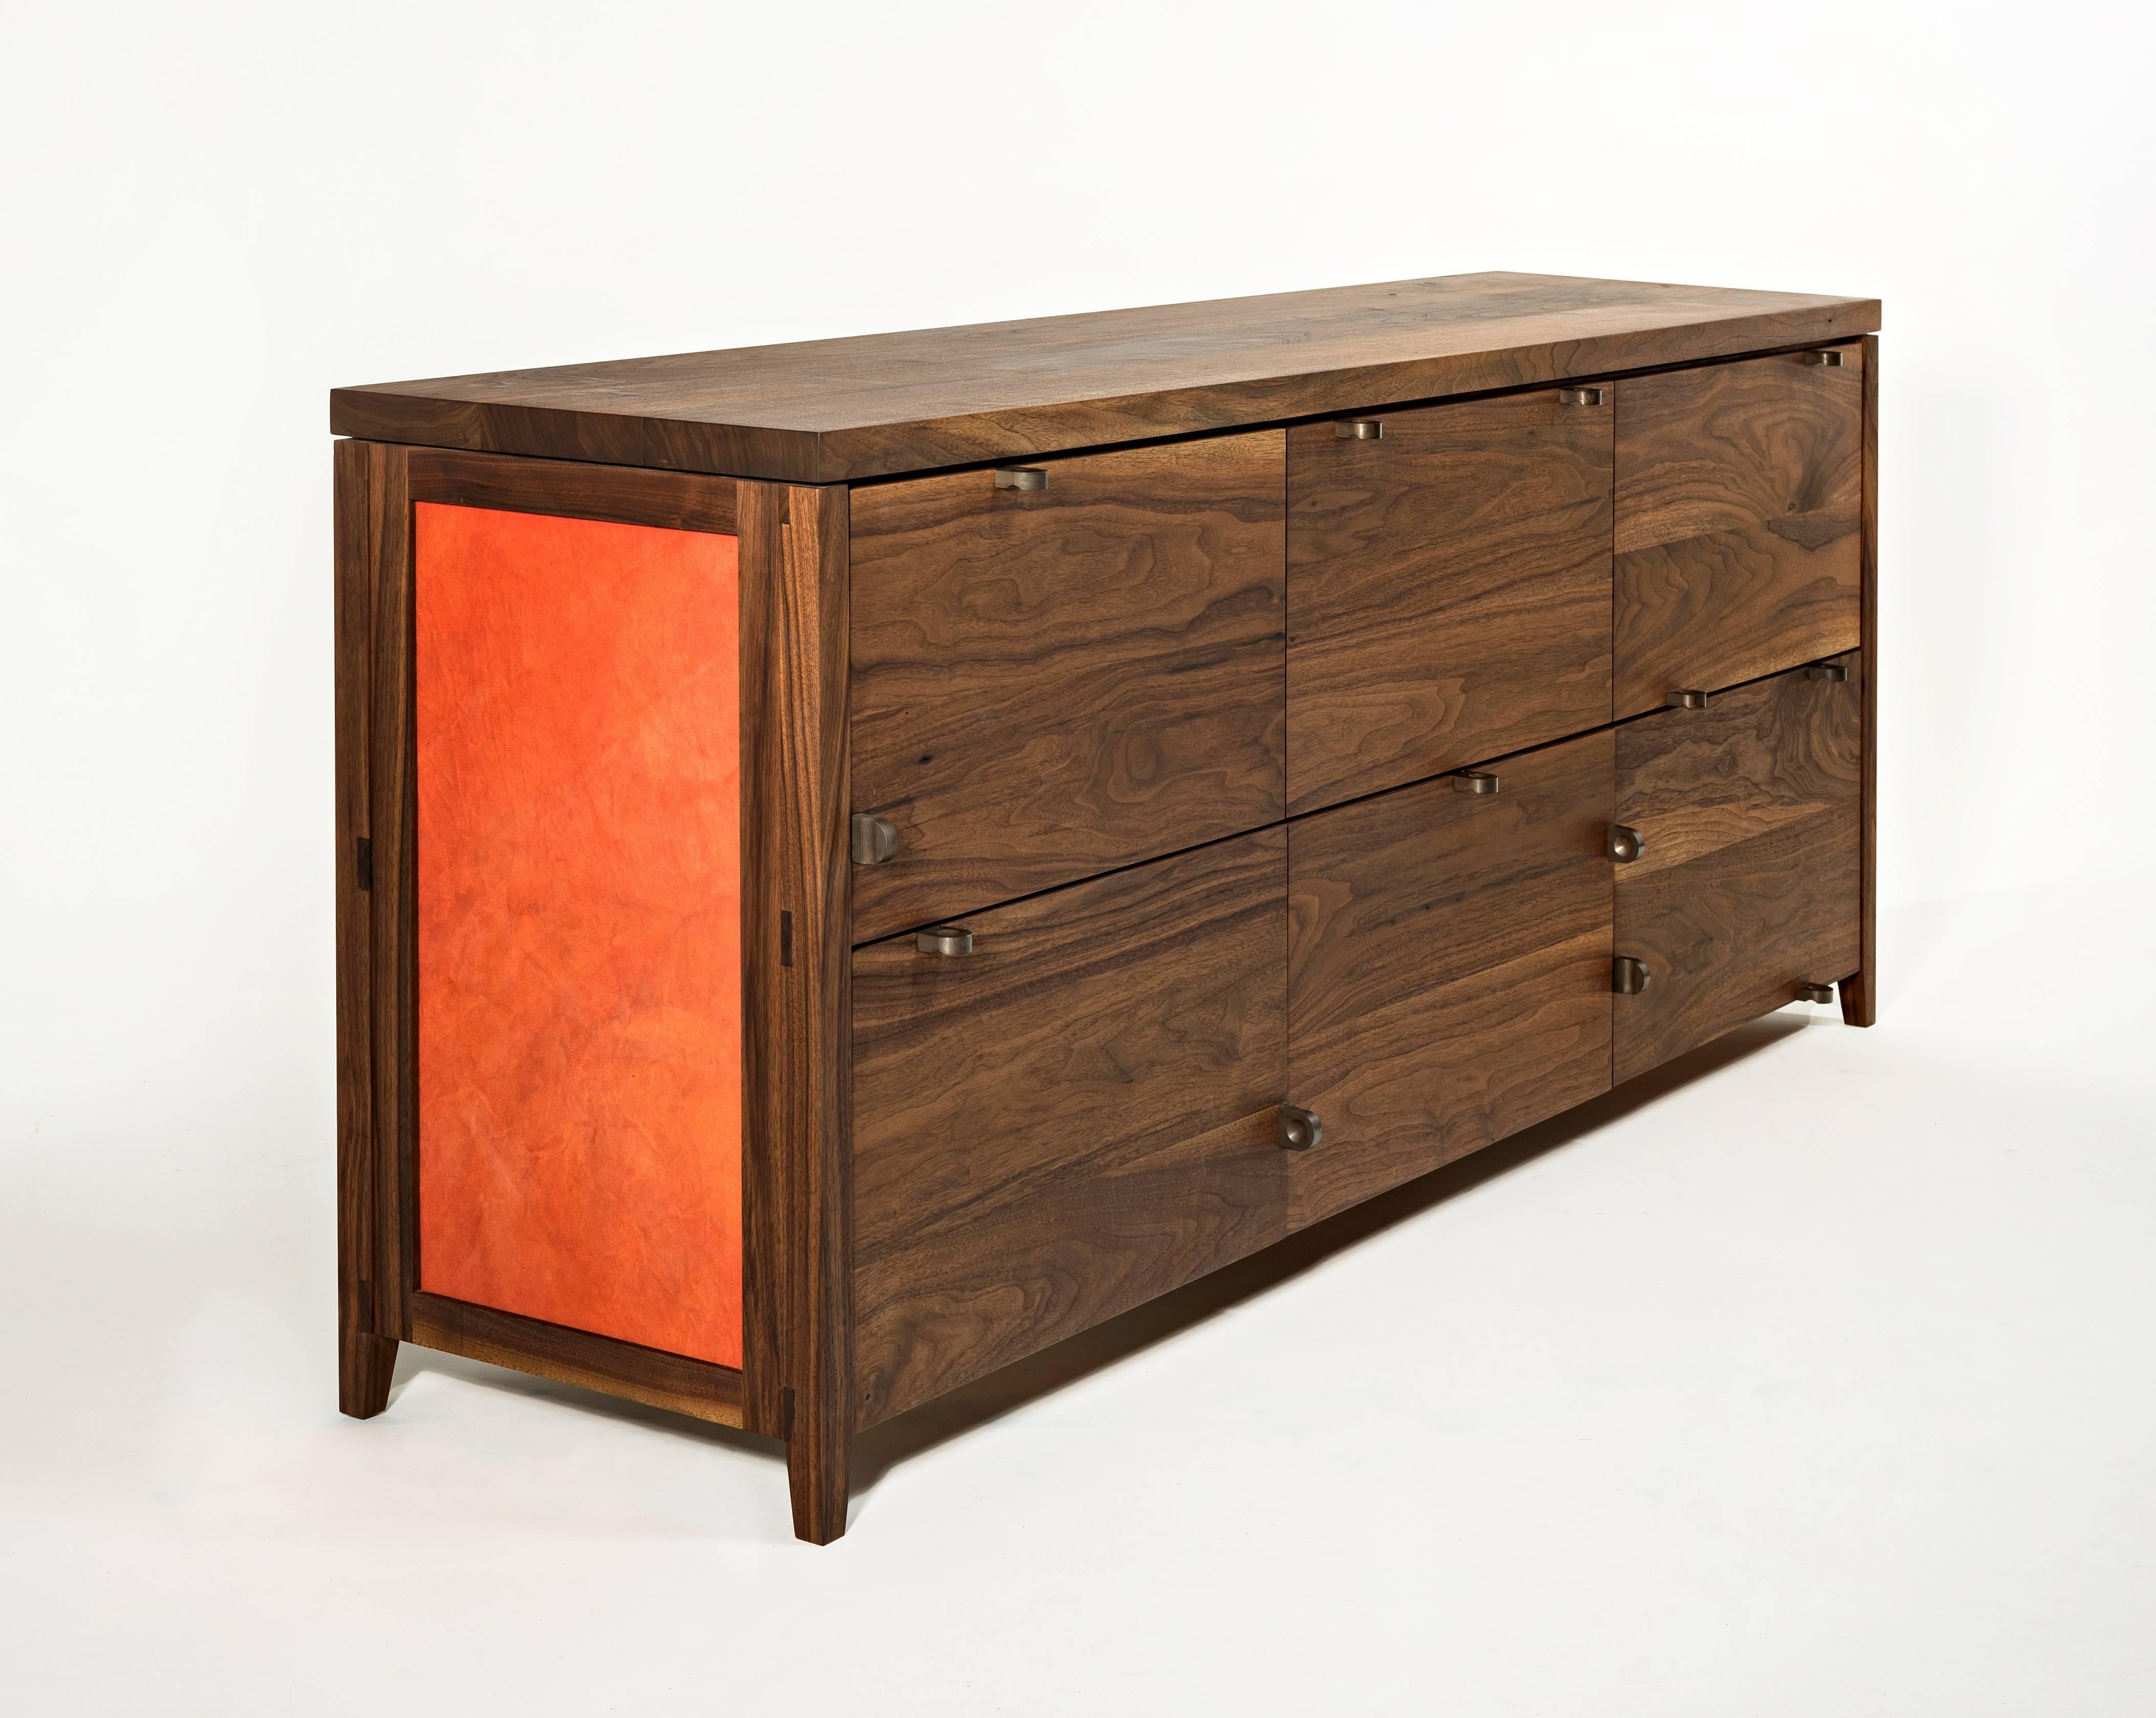 The Canvas credenza is an exploration of new materials and concepts.

The solid wood construction of the case provides moments of beautiful joinery which can be seen throughout.

The hand-dyed canvas panels provide a natural inconsistency that